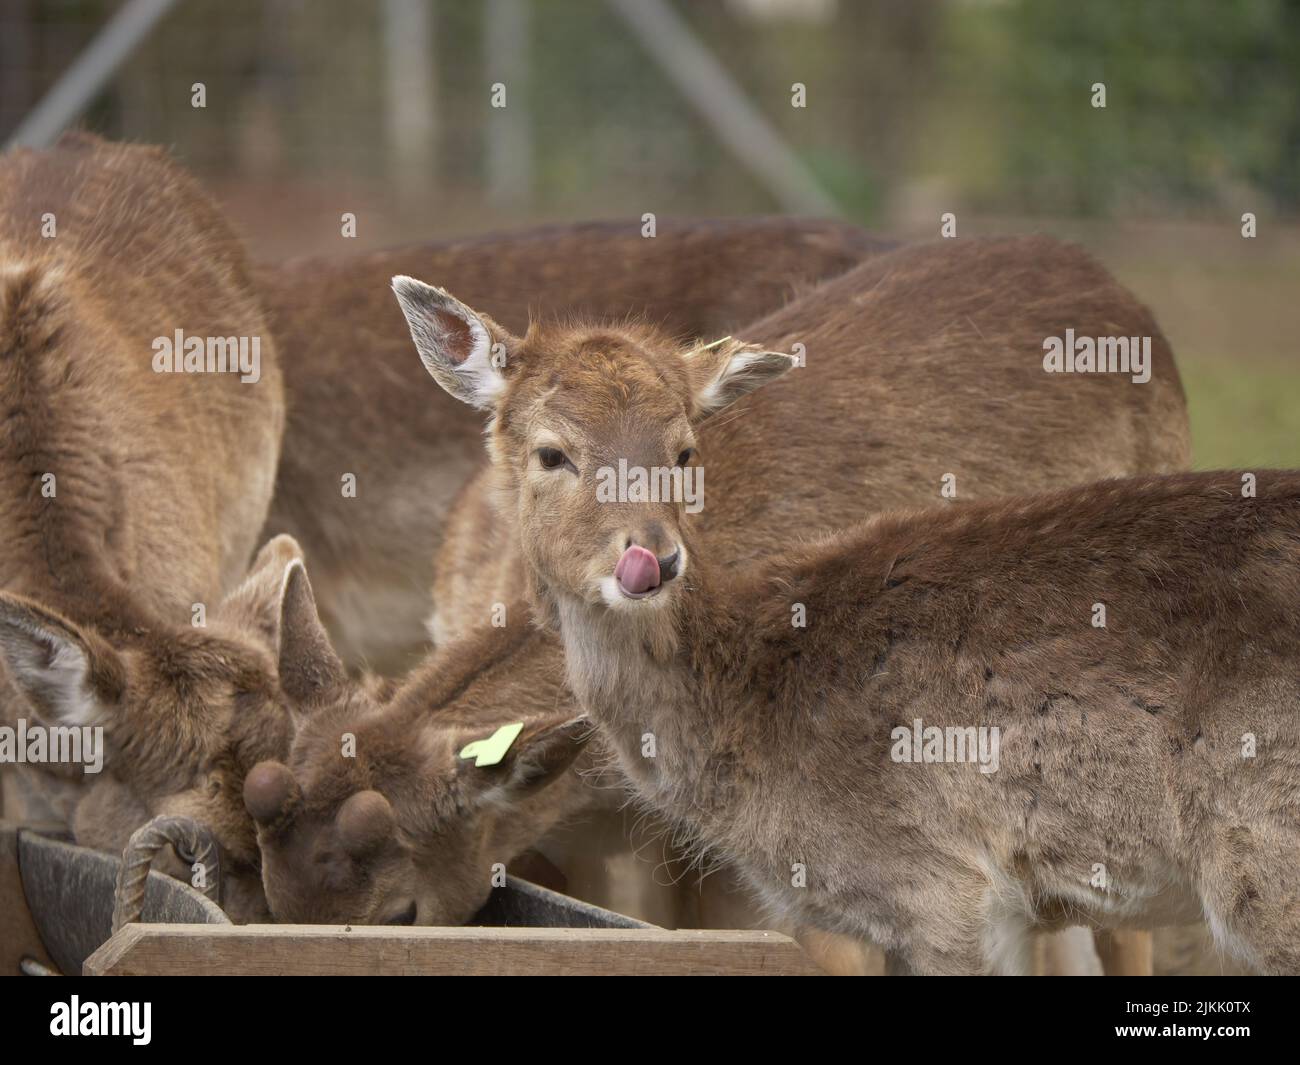 A small herd of red deer eating from a wooden feeder at the zoo while one of them is looking away during daytime with blurred background Stock Photo